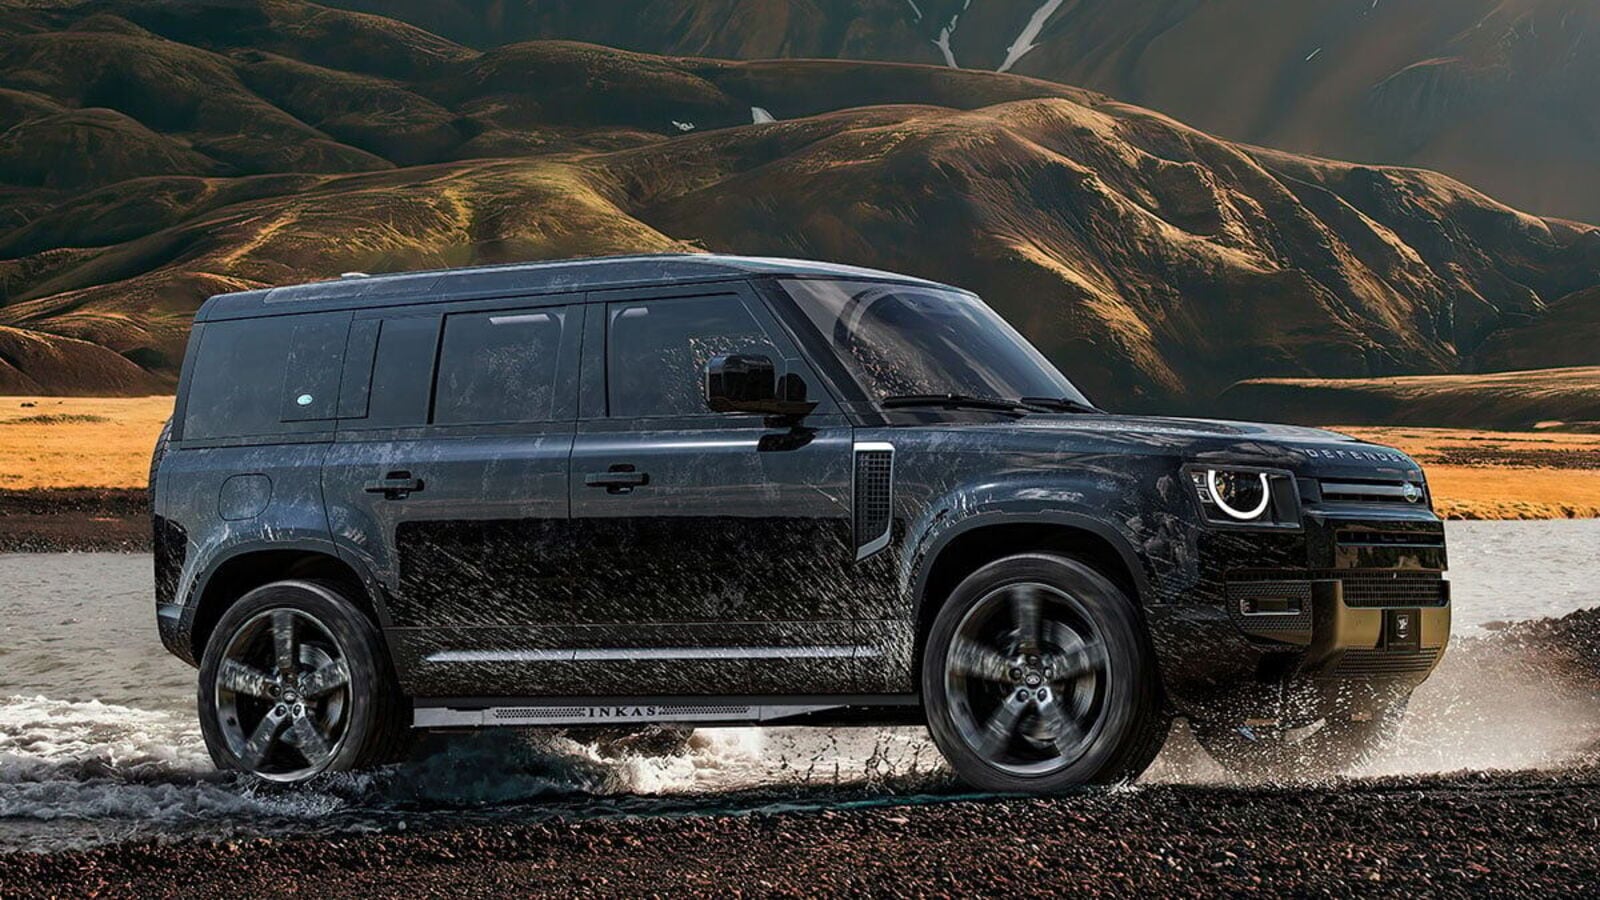 This stealthy Land Rover Defender is built like a tank. Details, land rover  defender